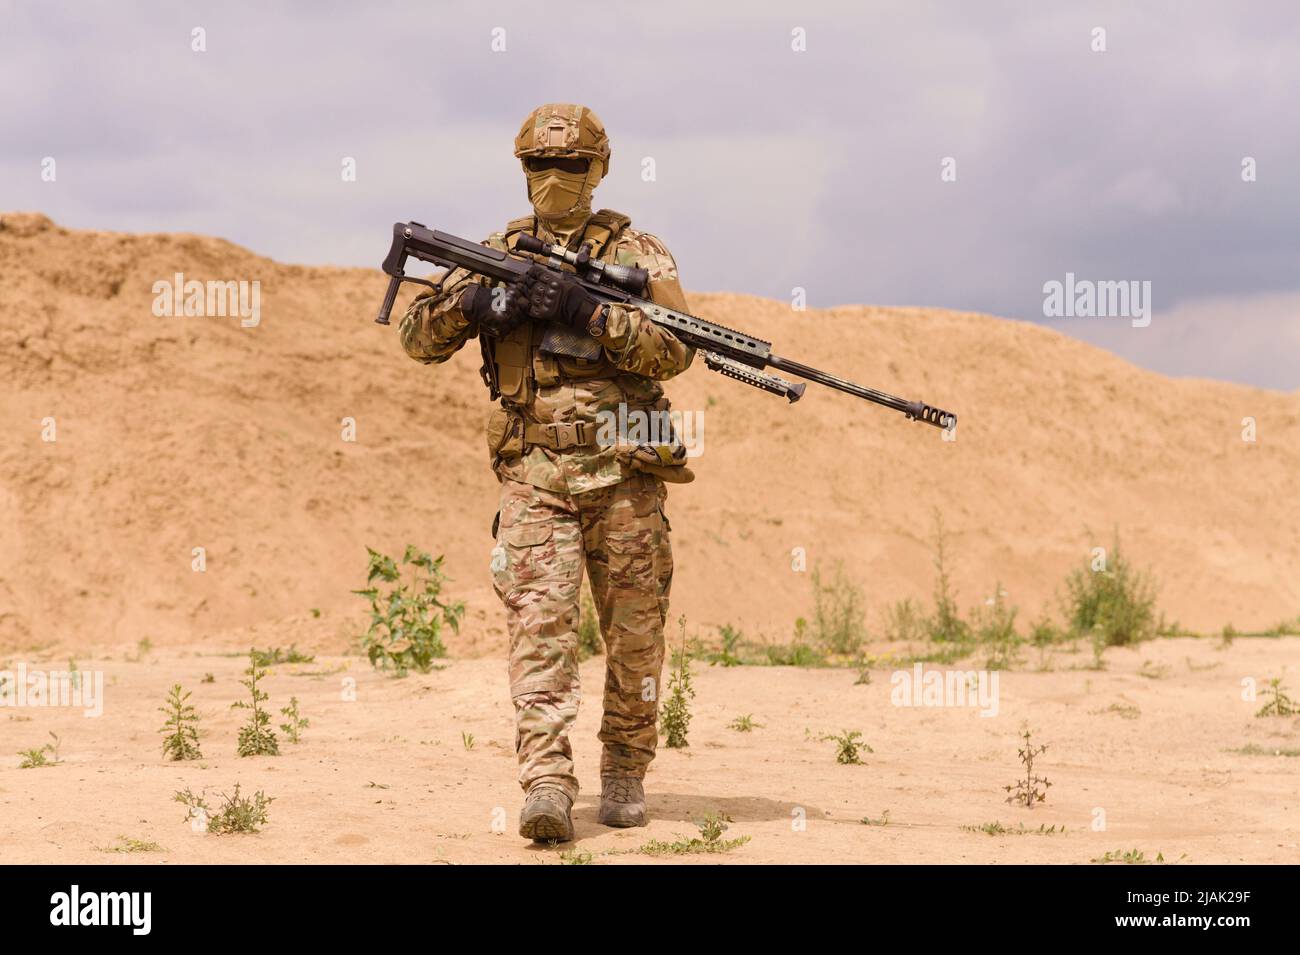 Armed special forces soldier with rifle in the desert during a military operation. Stock Photo